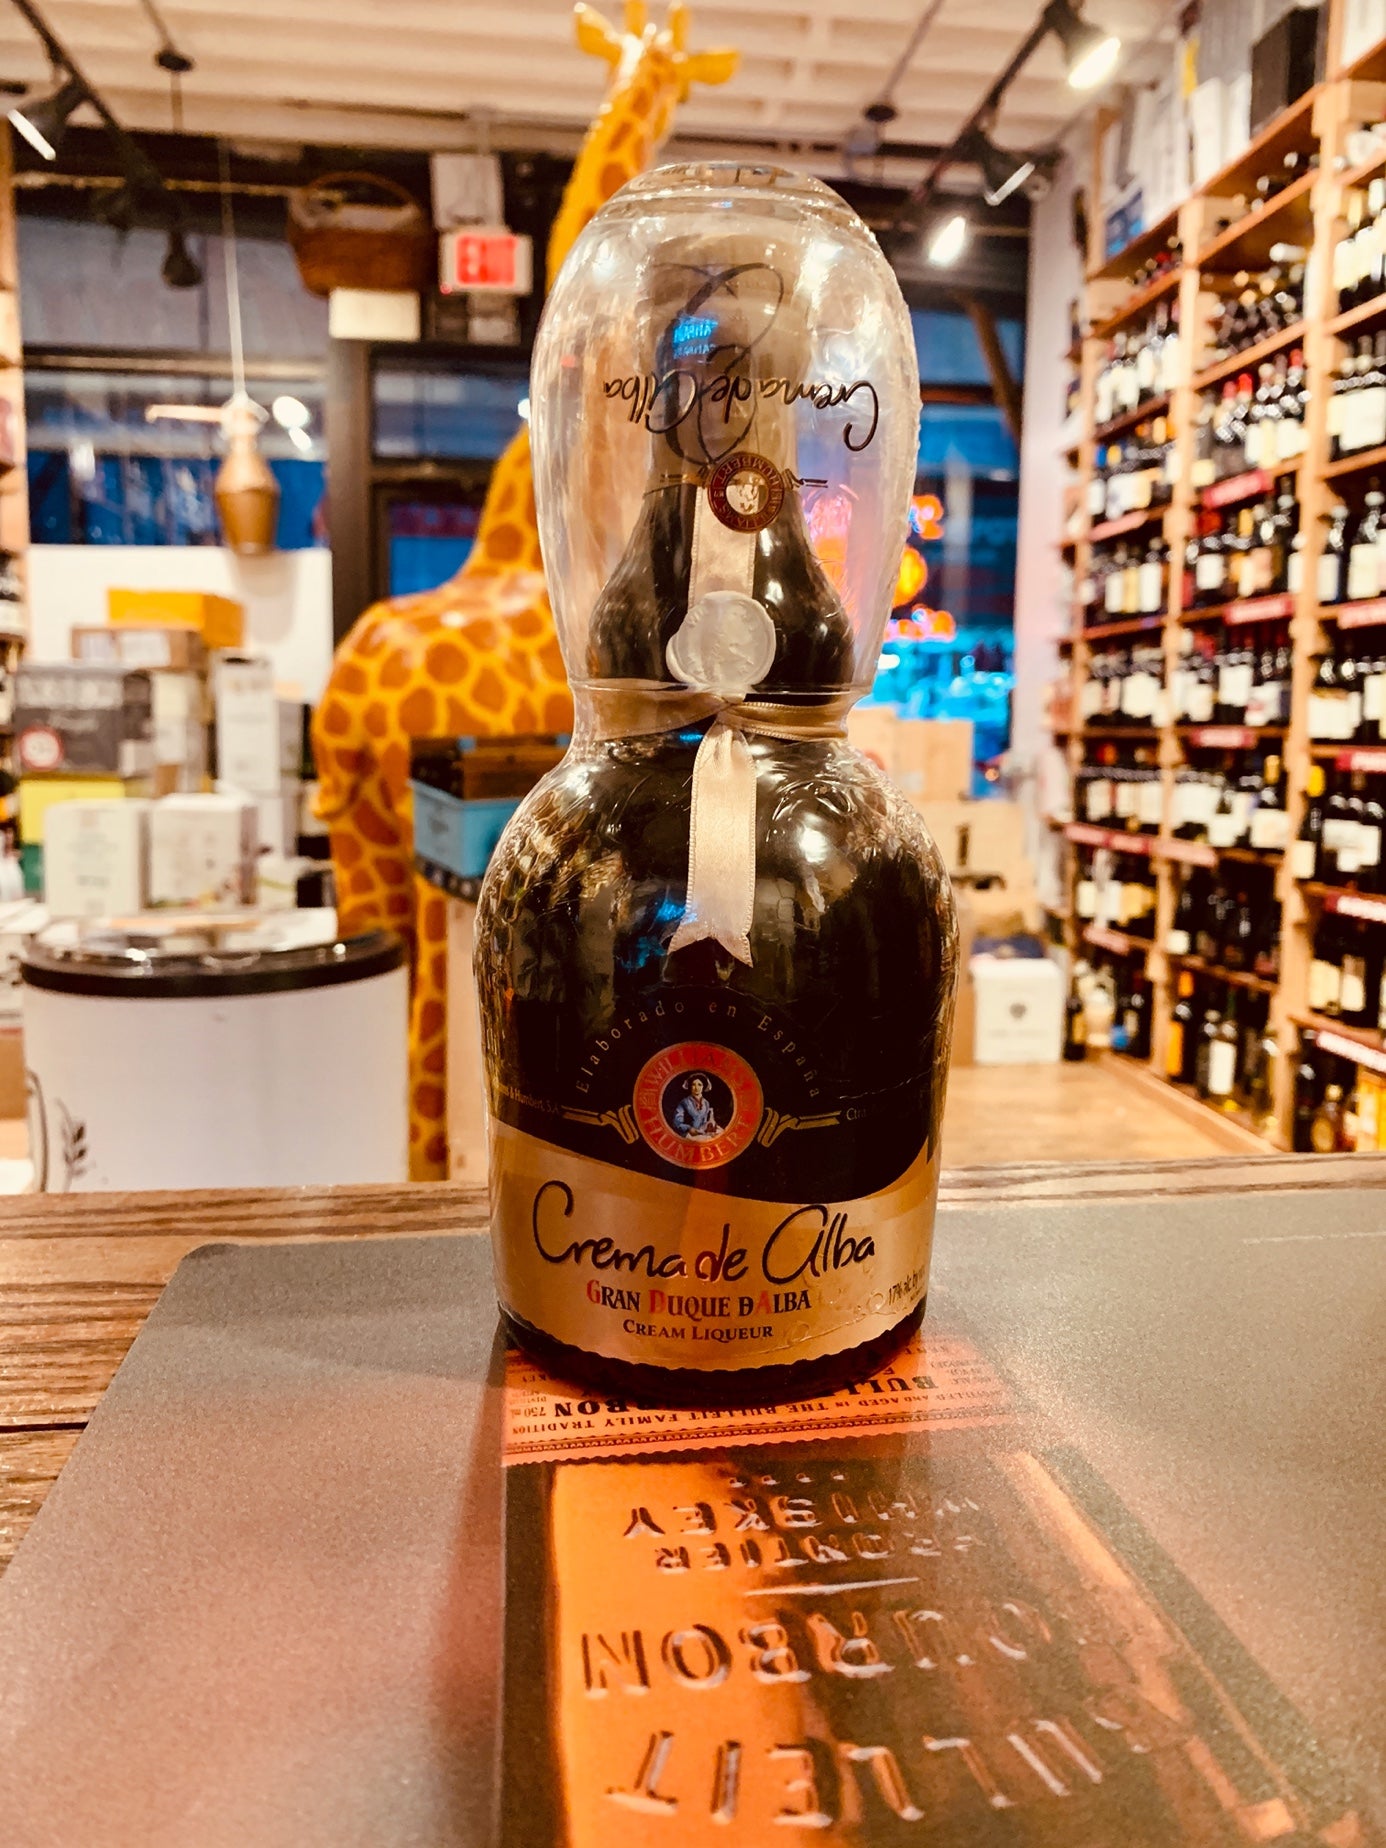 Crema De Alba 750mL Williams Humbert small rounded squat dark bottle with a gold label and a glass over the top of the bottle